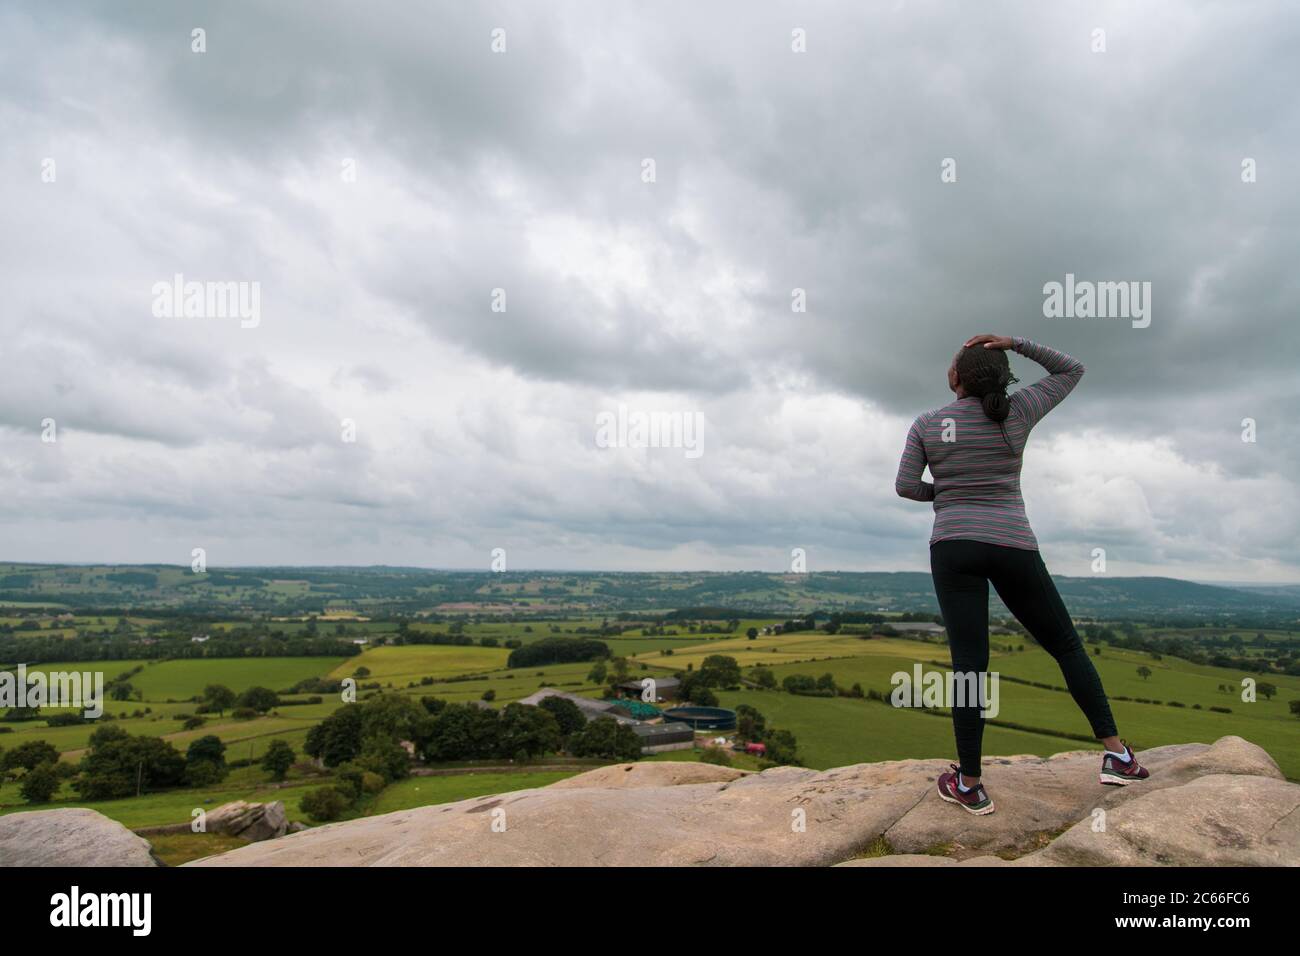 A black woman standing at the top of a rock looking at the cloudy horizon wearing athletic attire Stock Photo